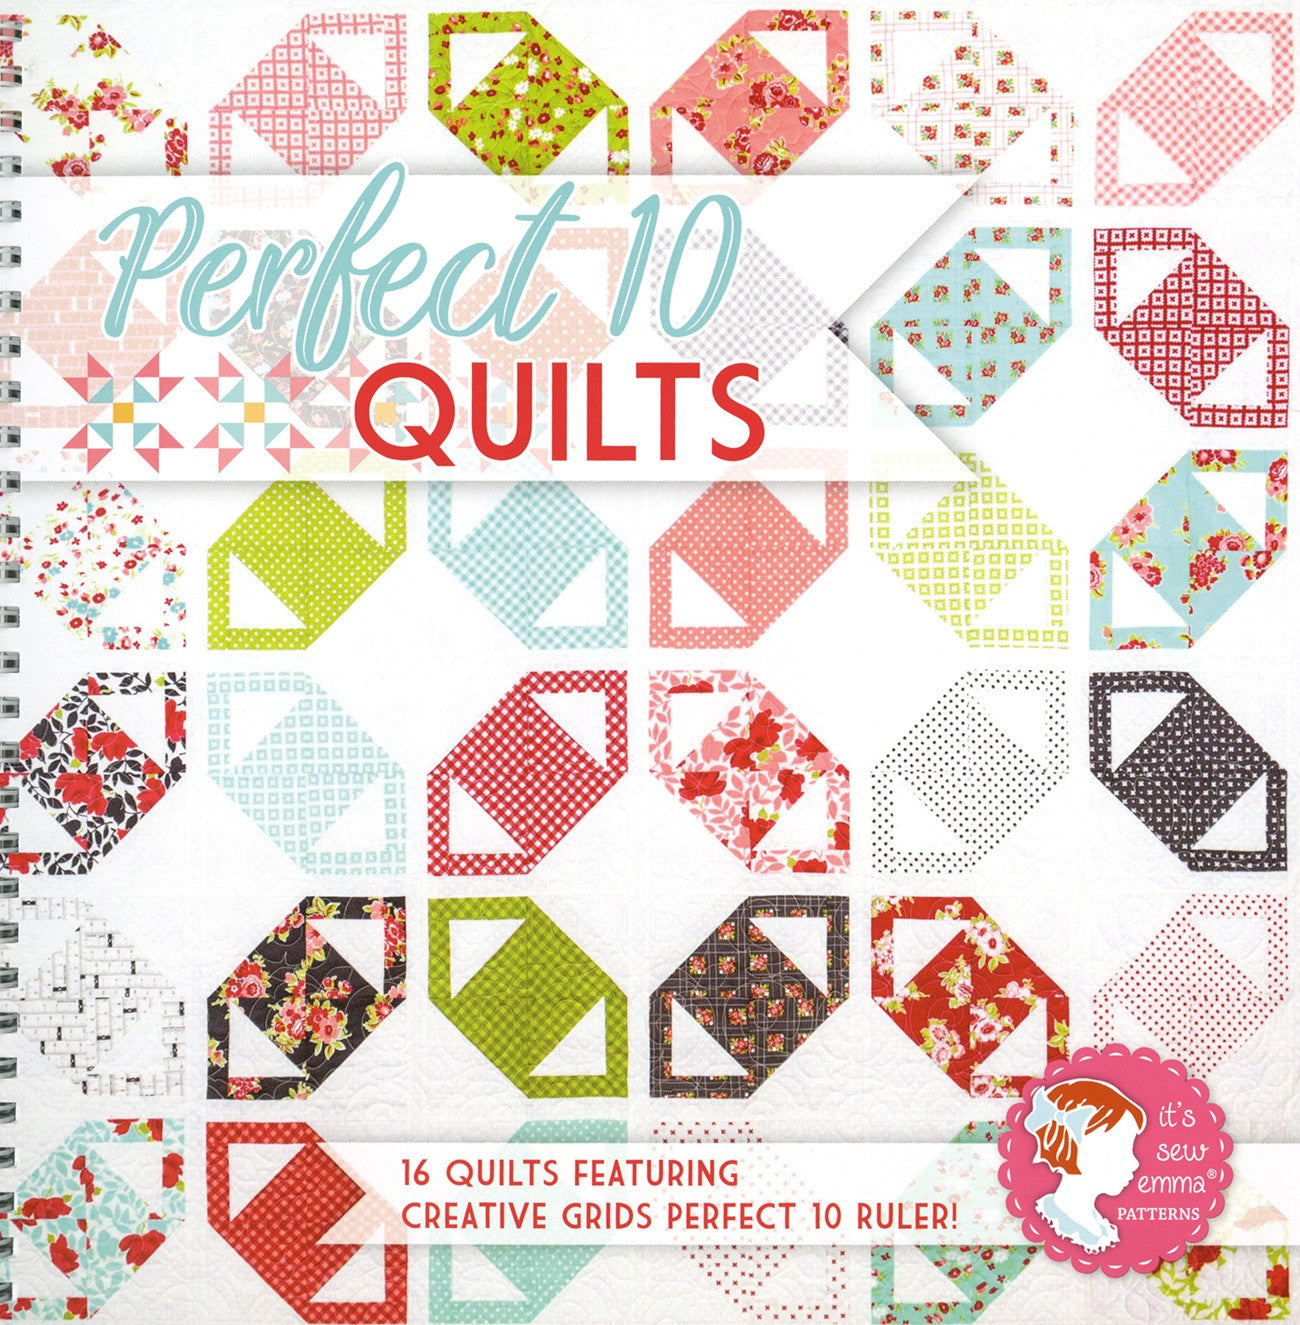 Perfect 10 Quilts Quilt Pattern Book by Kimberly Jolly for It's Sew Emma